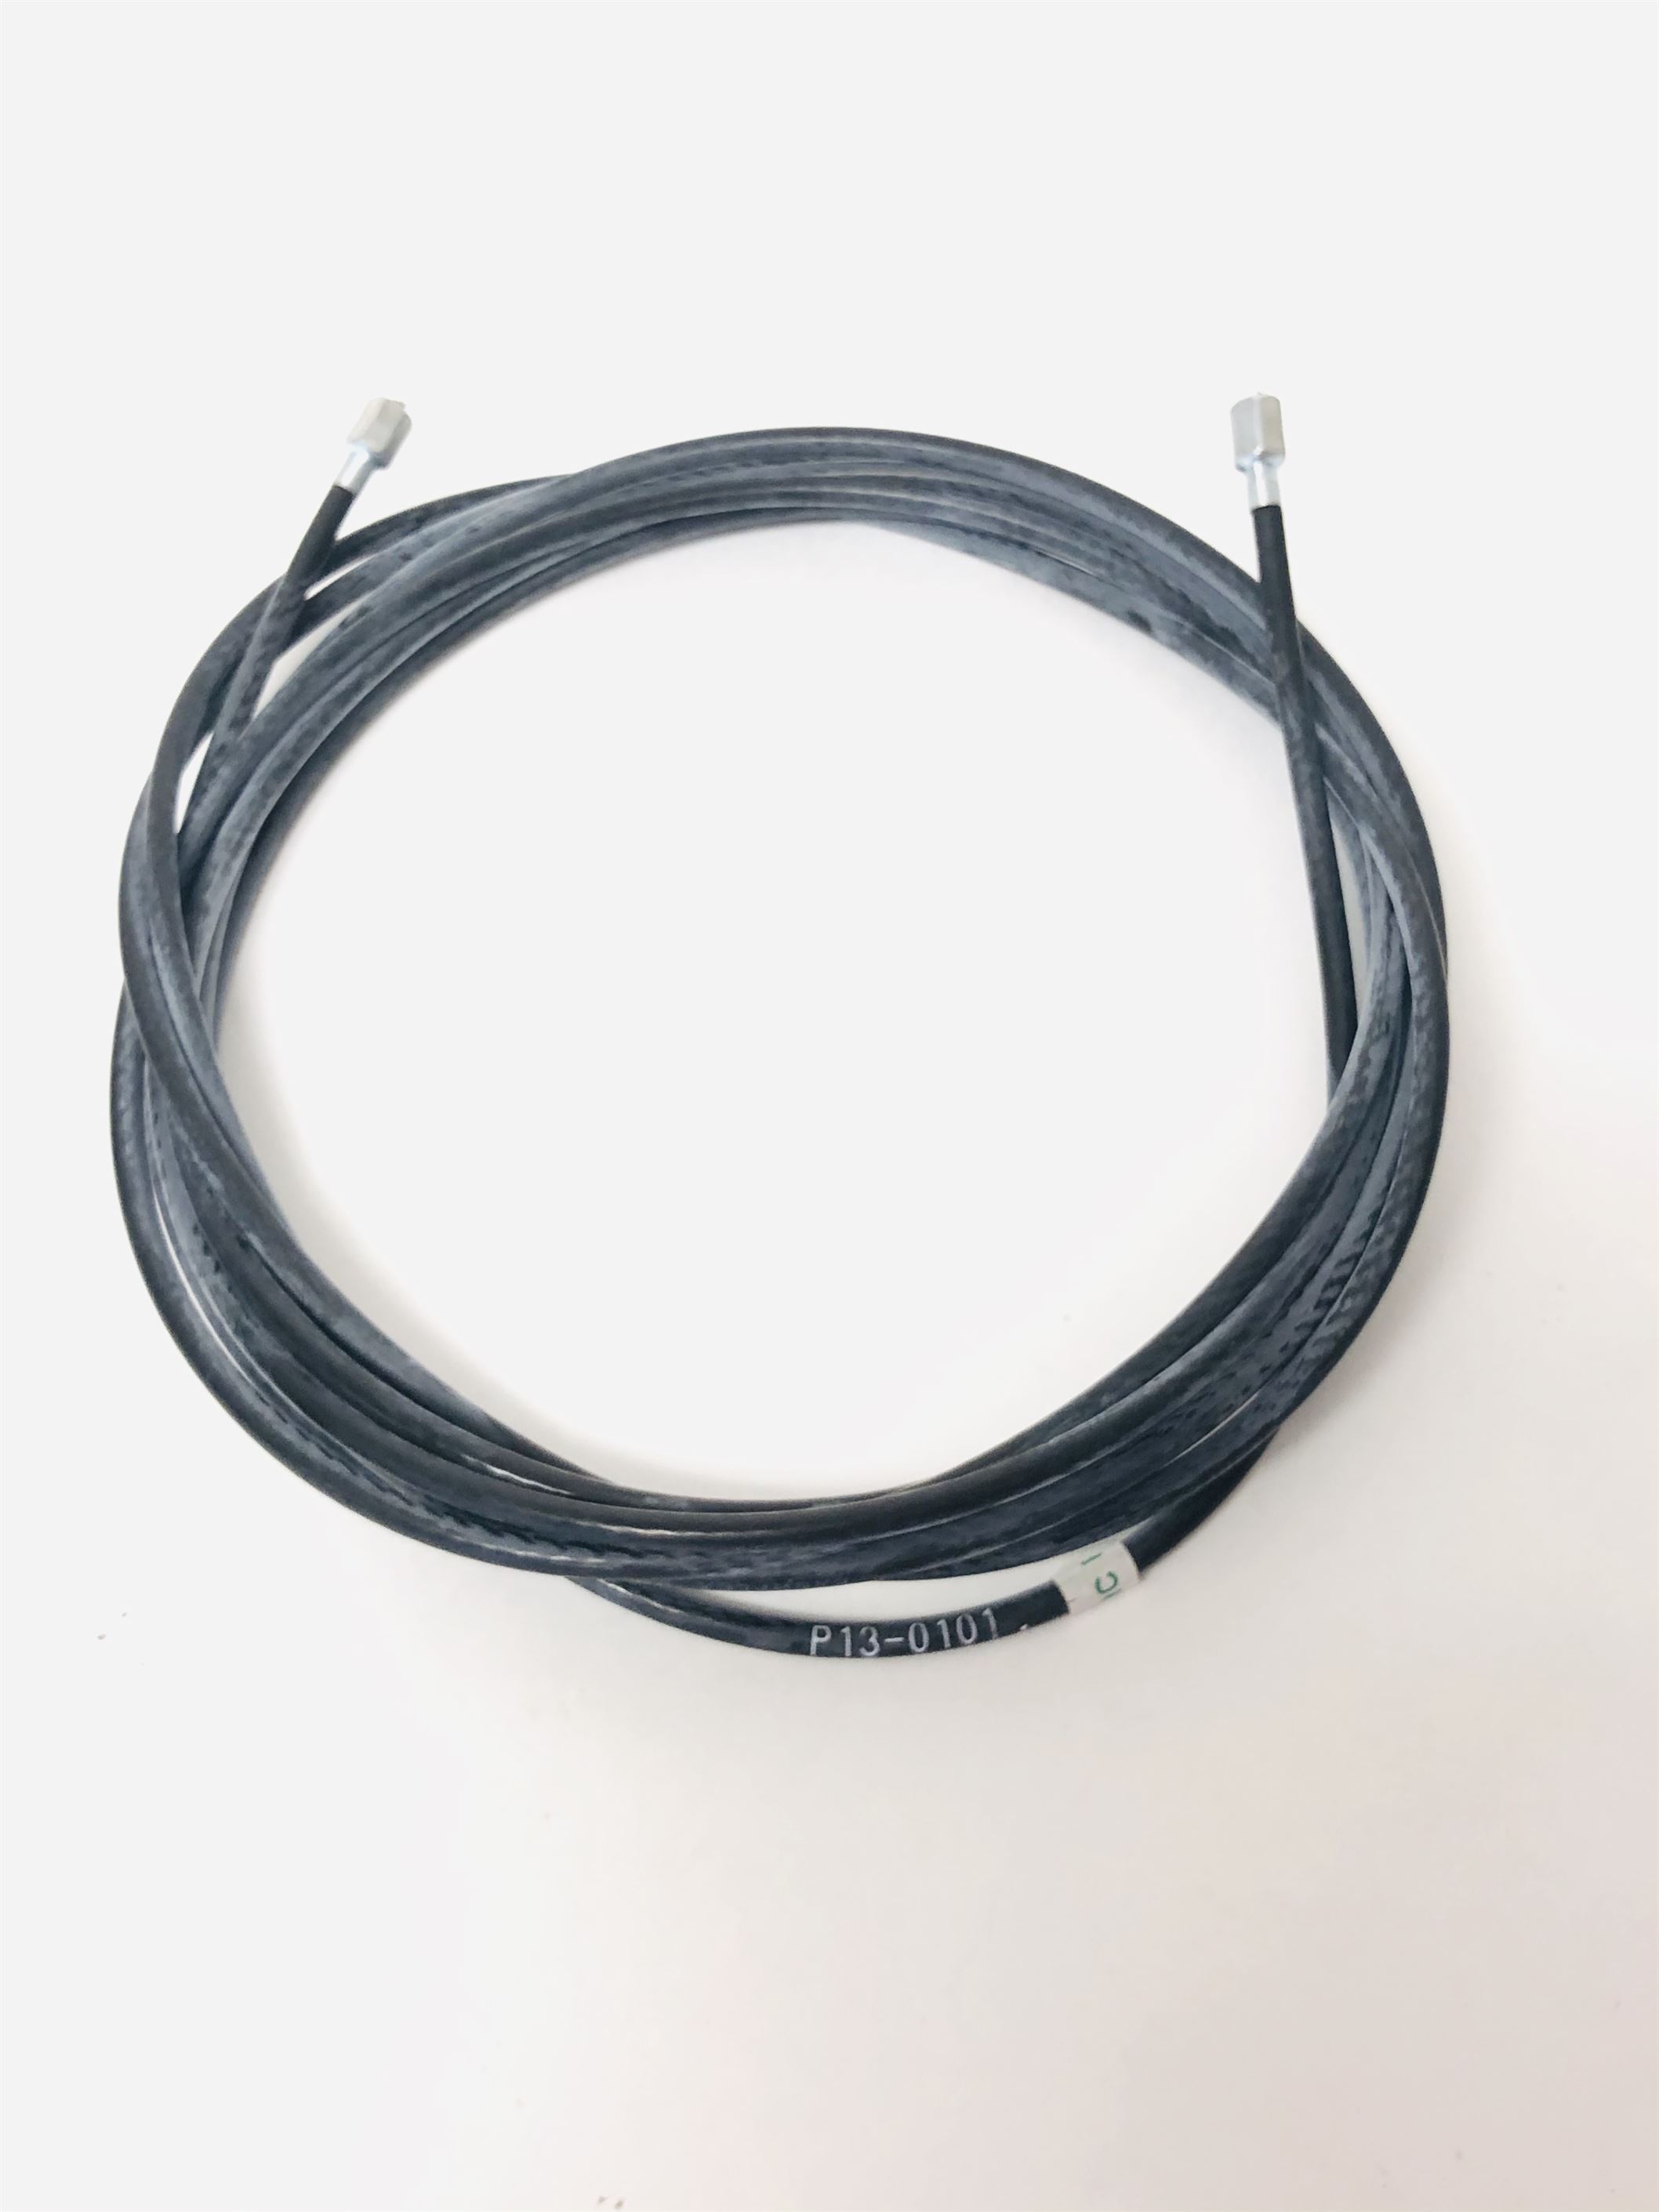 Cable; BE-BE, T2X 